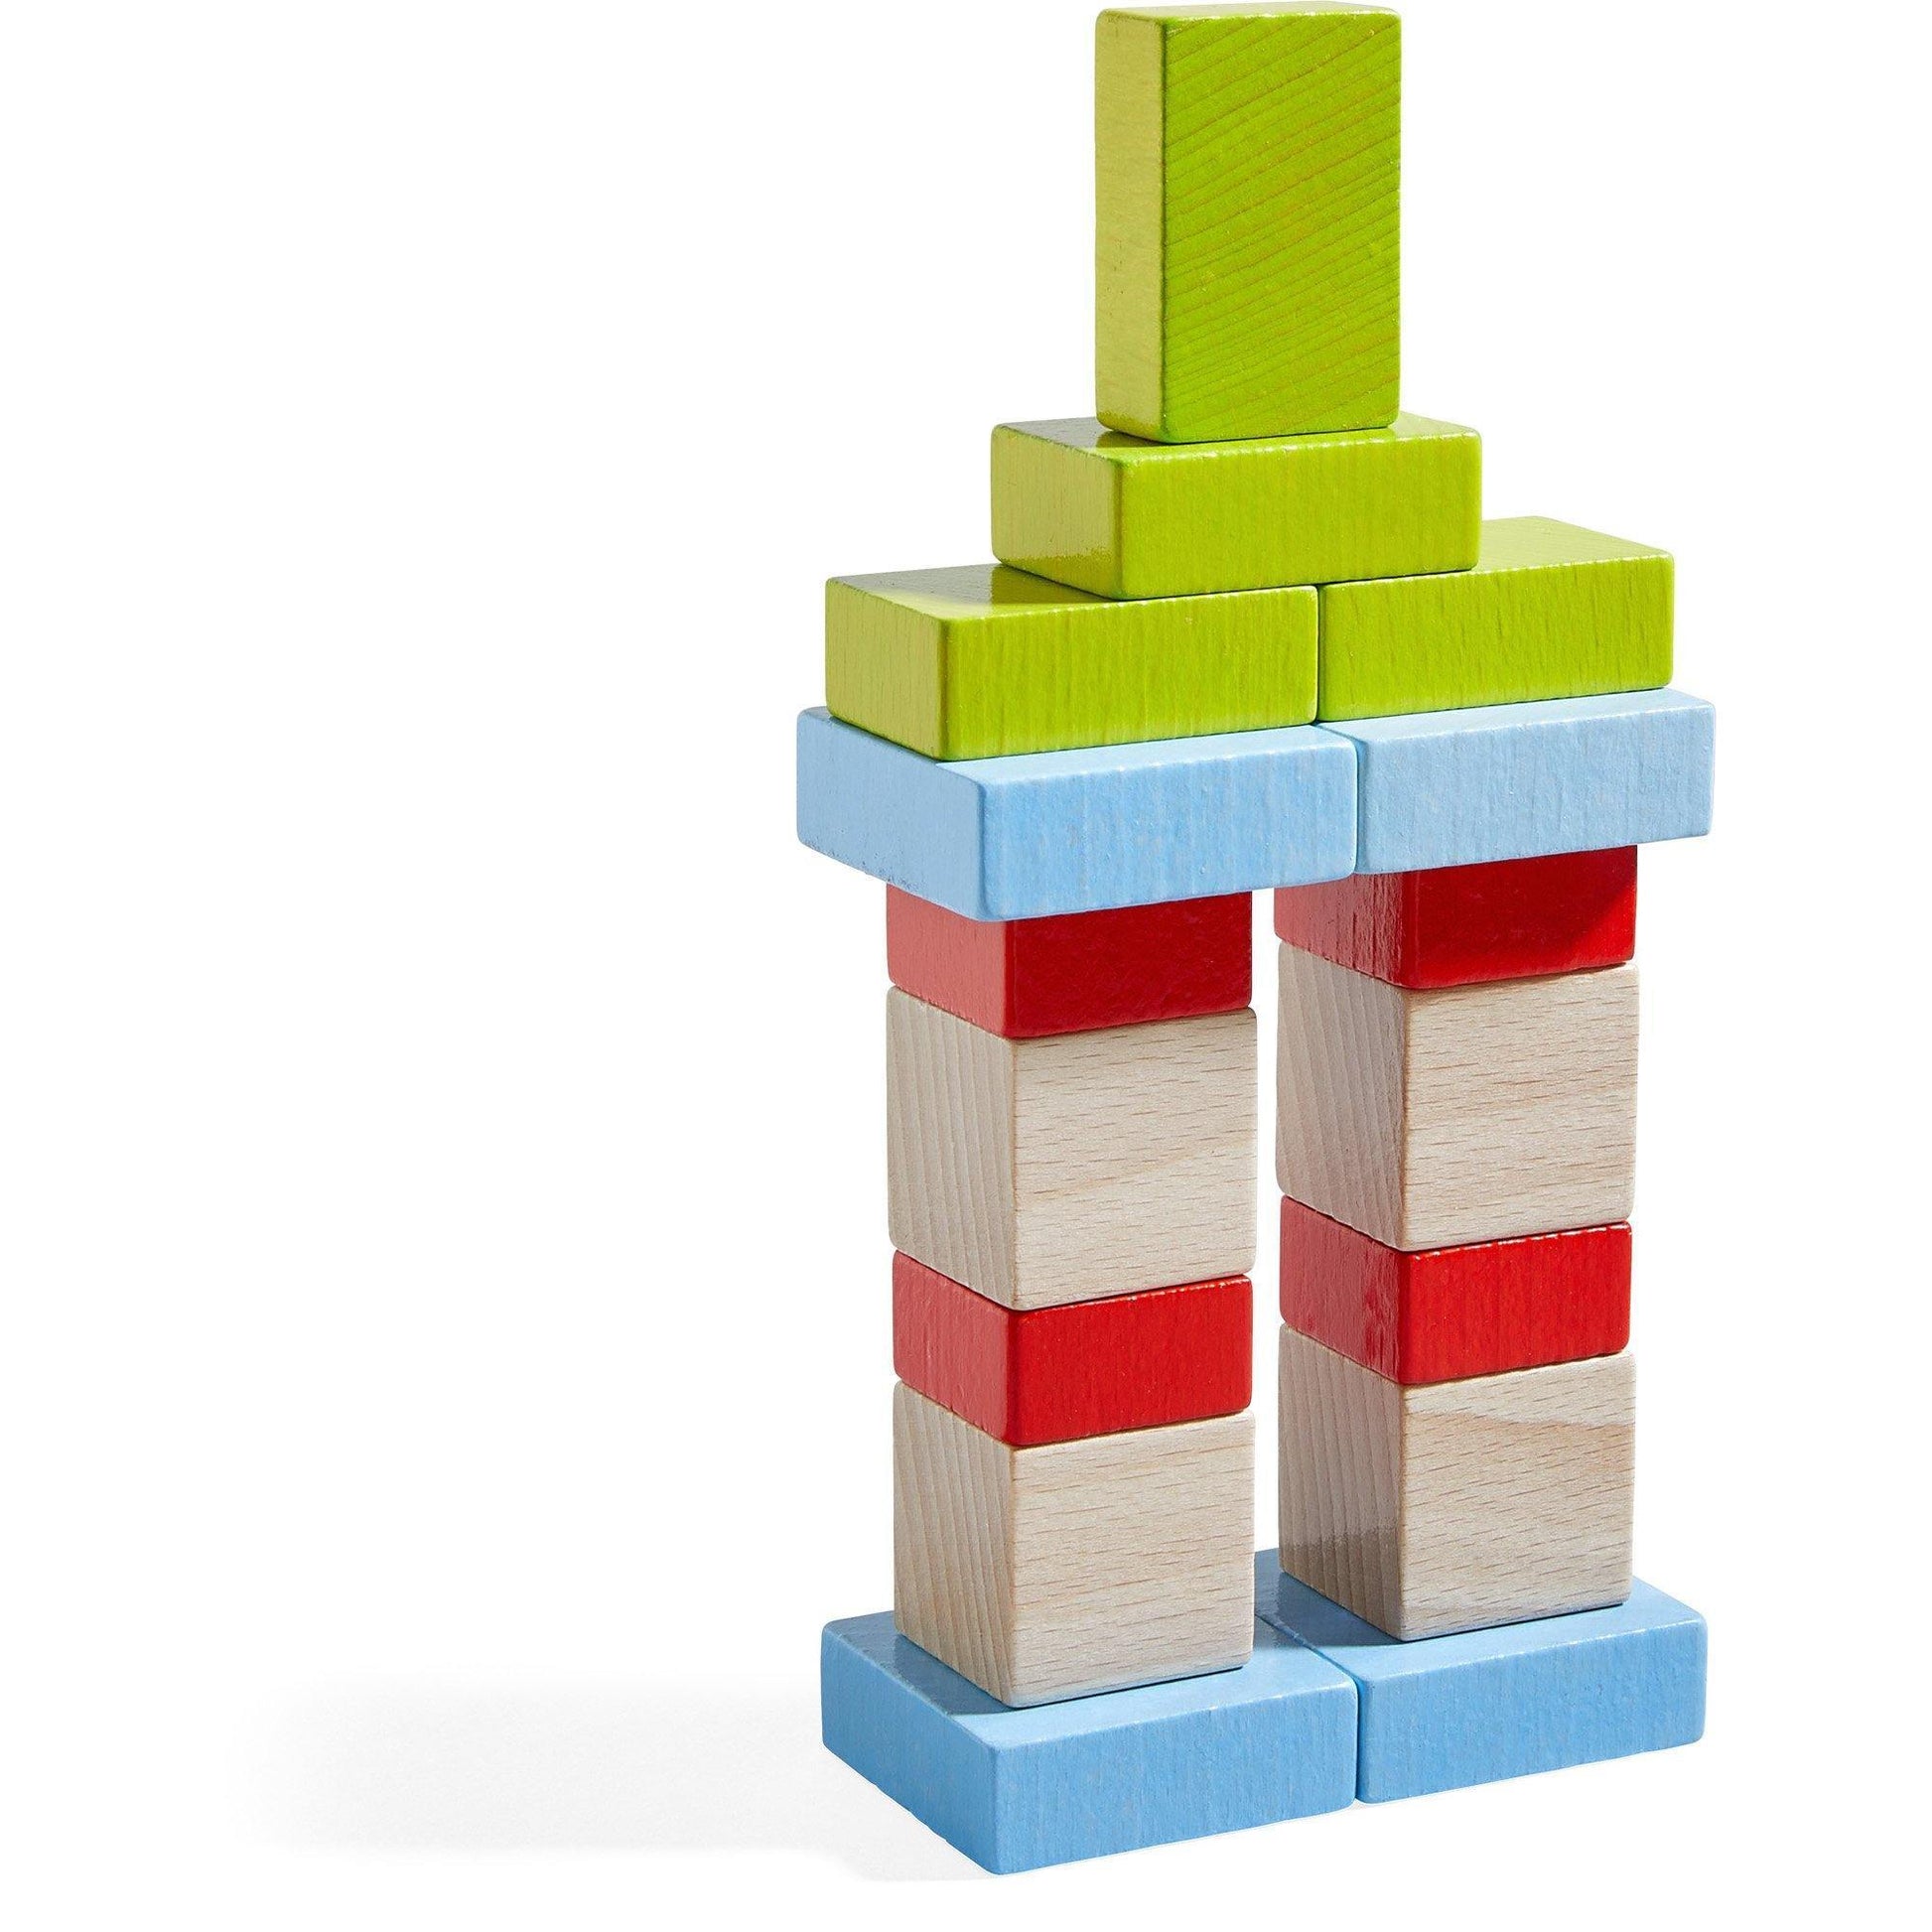 HABA - Four by Four Building Blocks - 3D Arranging Game - HABA - littleyoyo.ca